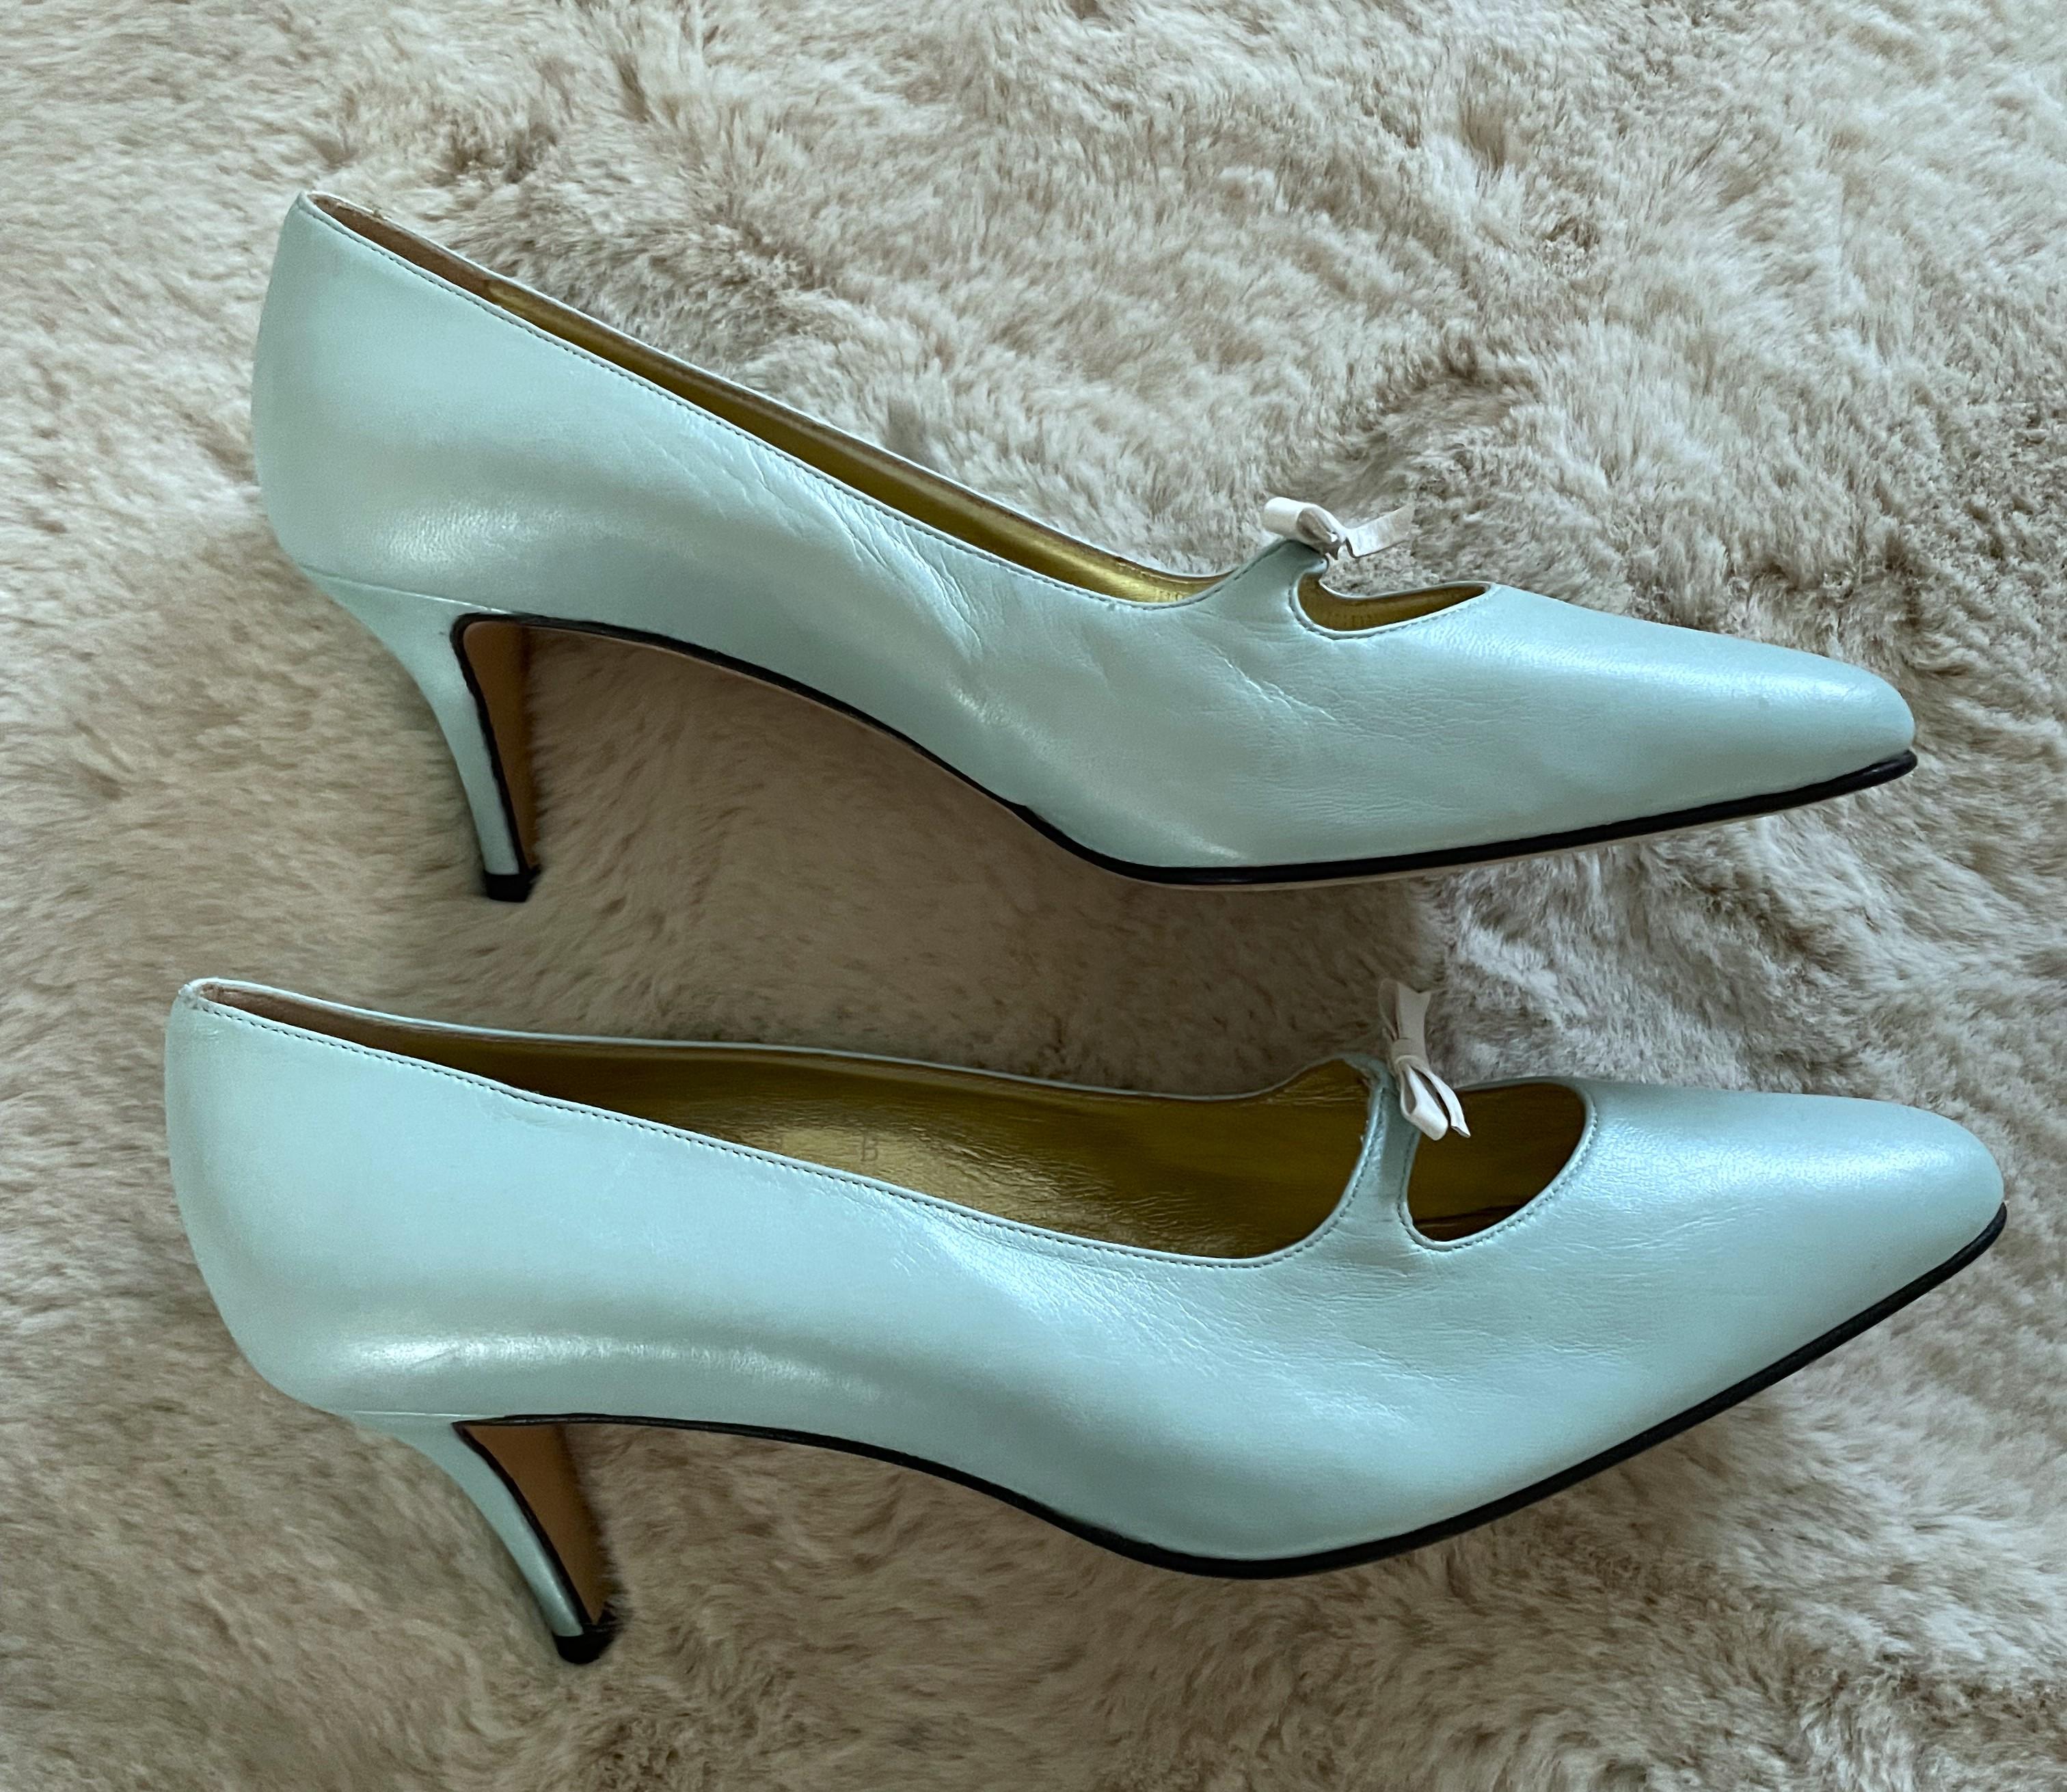 These cute vintage hard to find Escada baby blue pumps are typically a type of women's shoe from  the 1990s.  The color soft and pastel shade of light metallic blue, was popular in the 90s fashion scene.

Escada is a luxury fashion brand known for